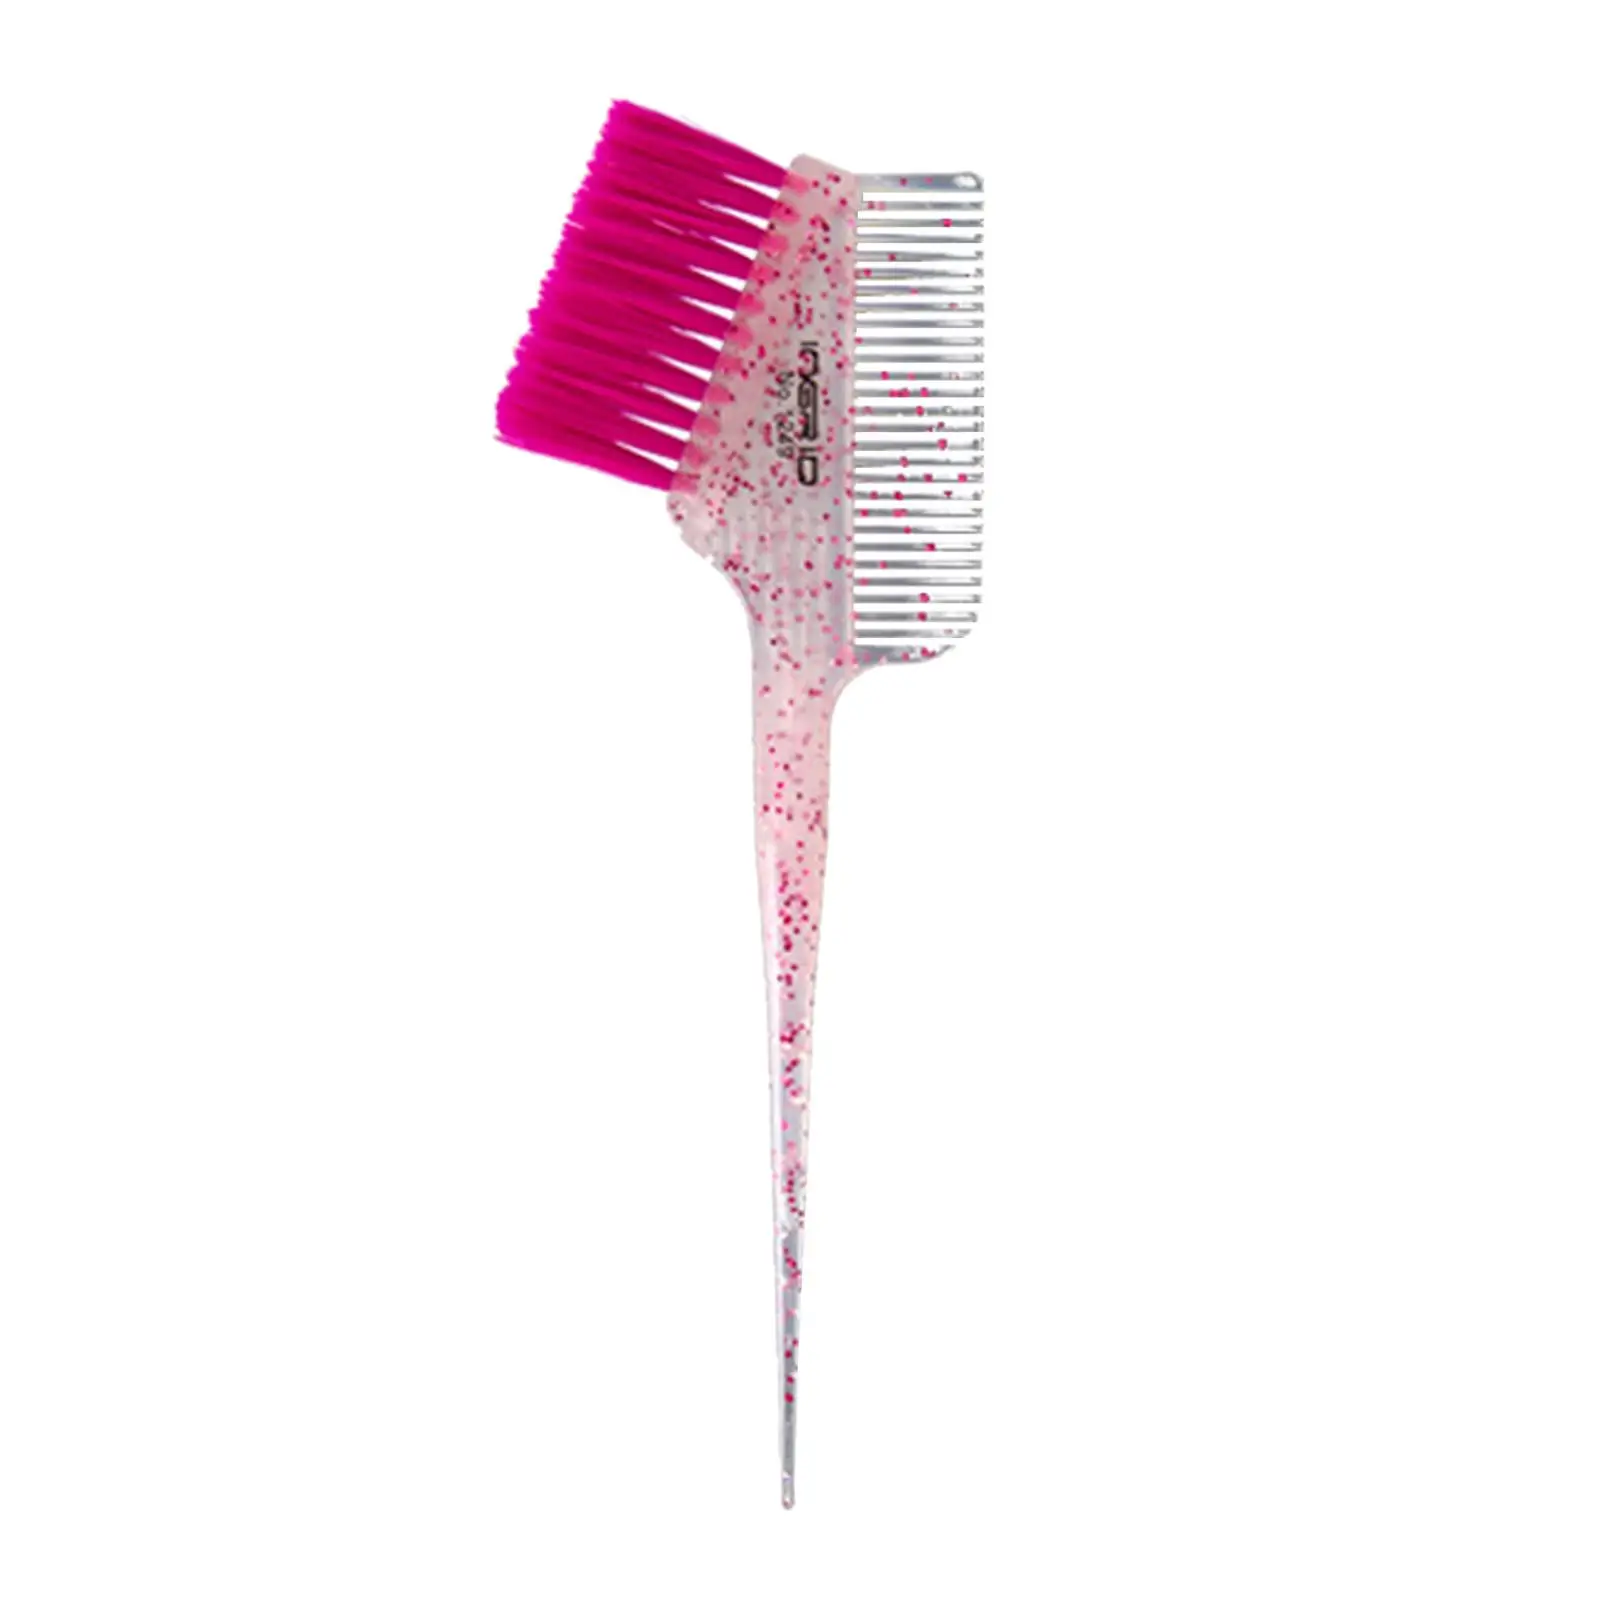  Head Hair Color Comb Styling Tools Long Handle Hairdressing Home